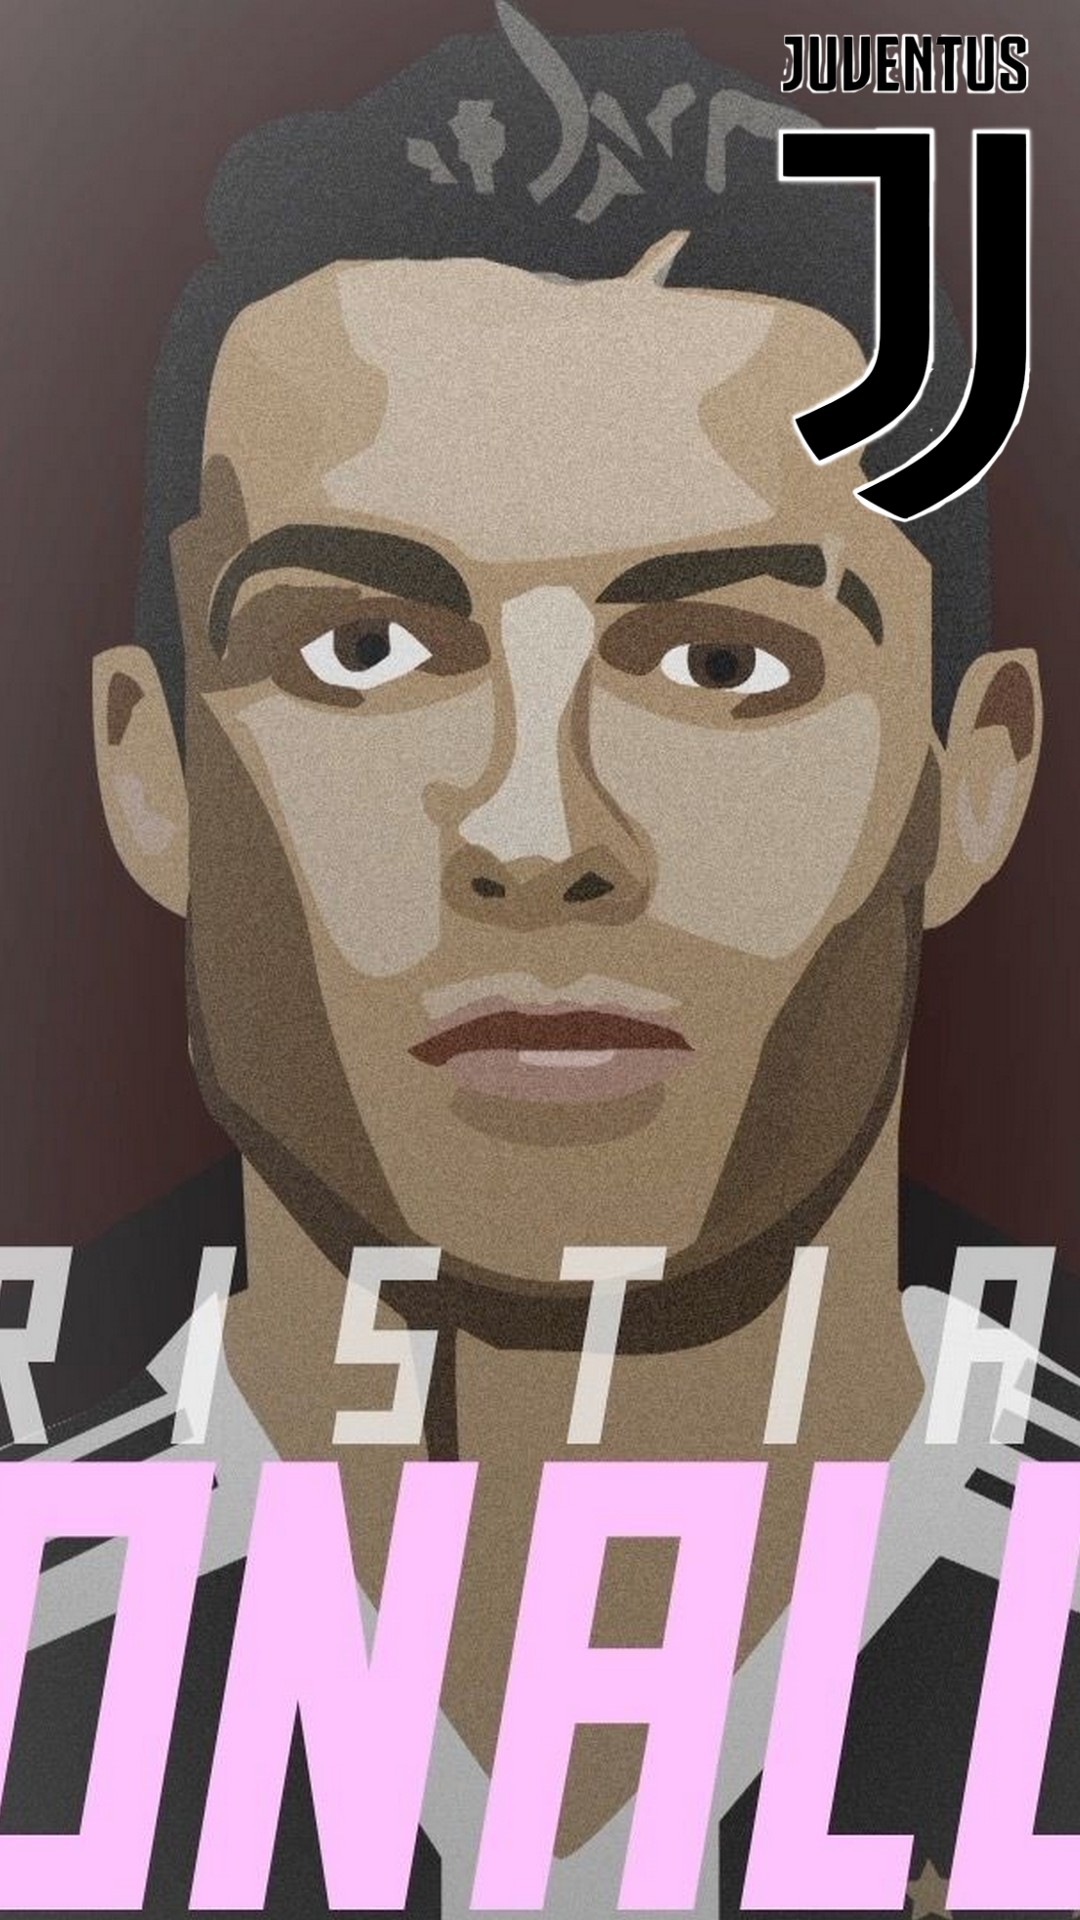 C Ronaldo Juventus iPhone X Wallpaper With Resolution 1080X1920 pixel. You can make this wallpaper for your Mac or Windows Desktop Background, iPhone, Android or Tablet and another Smartphone device for free